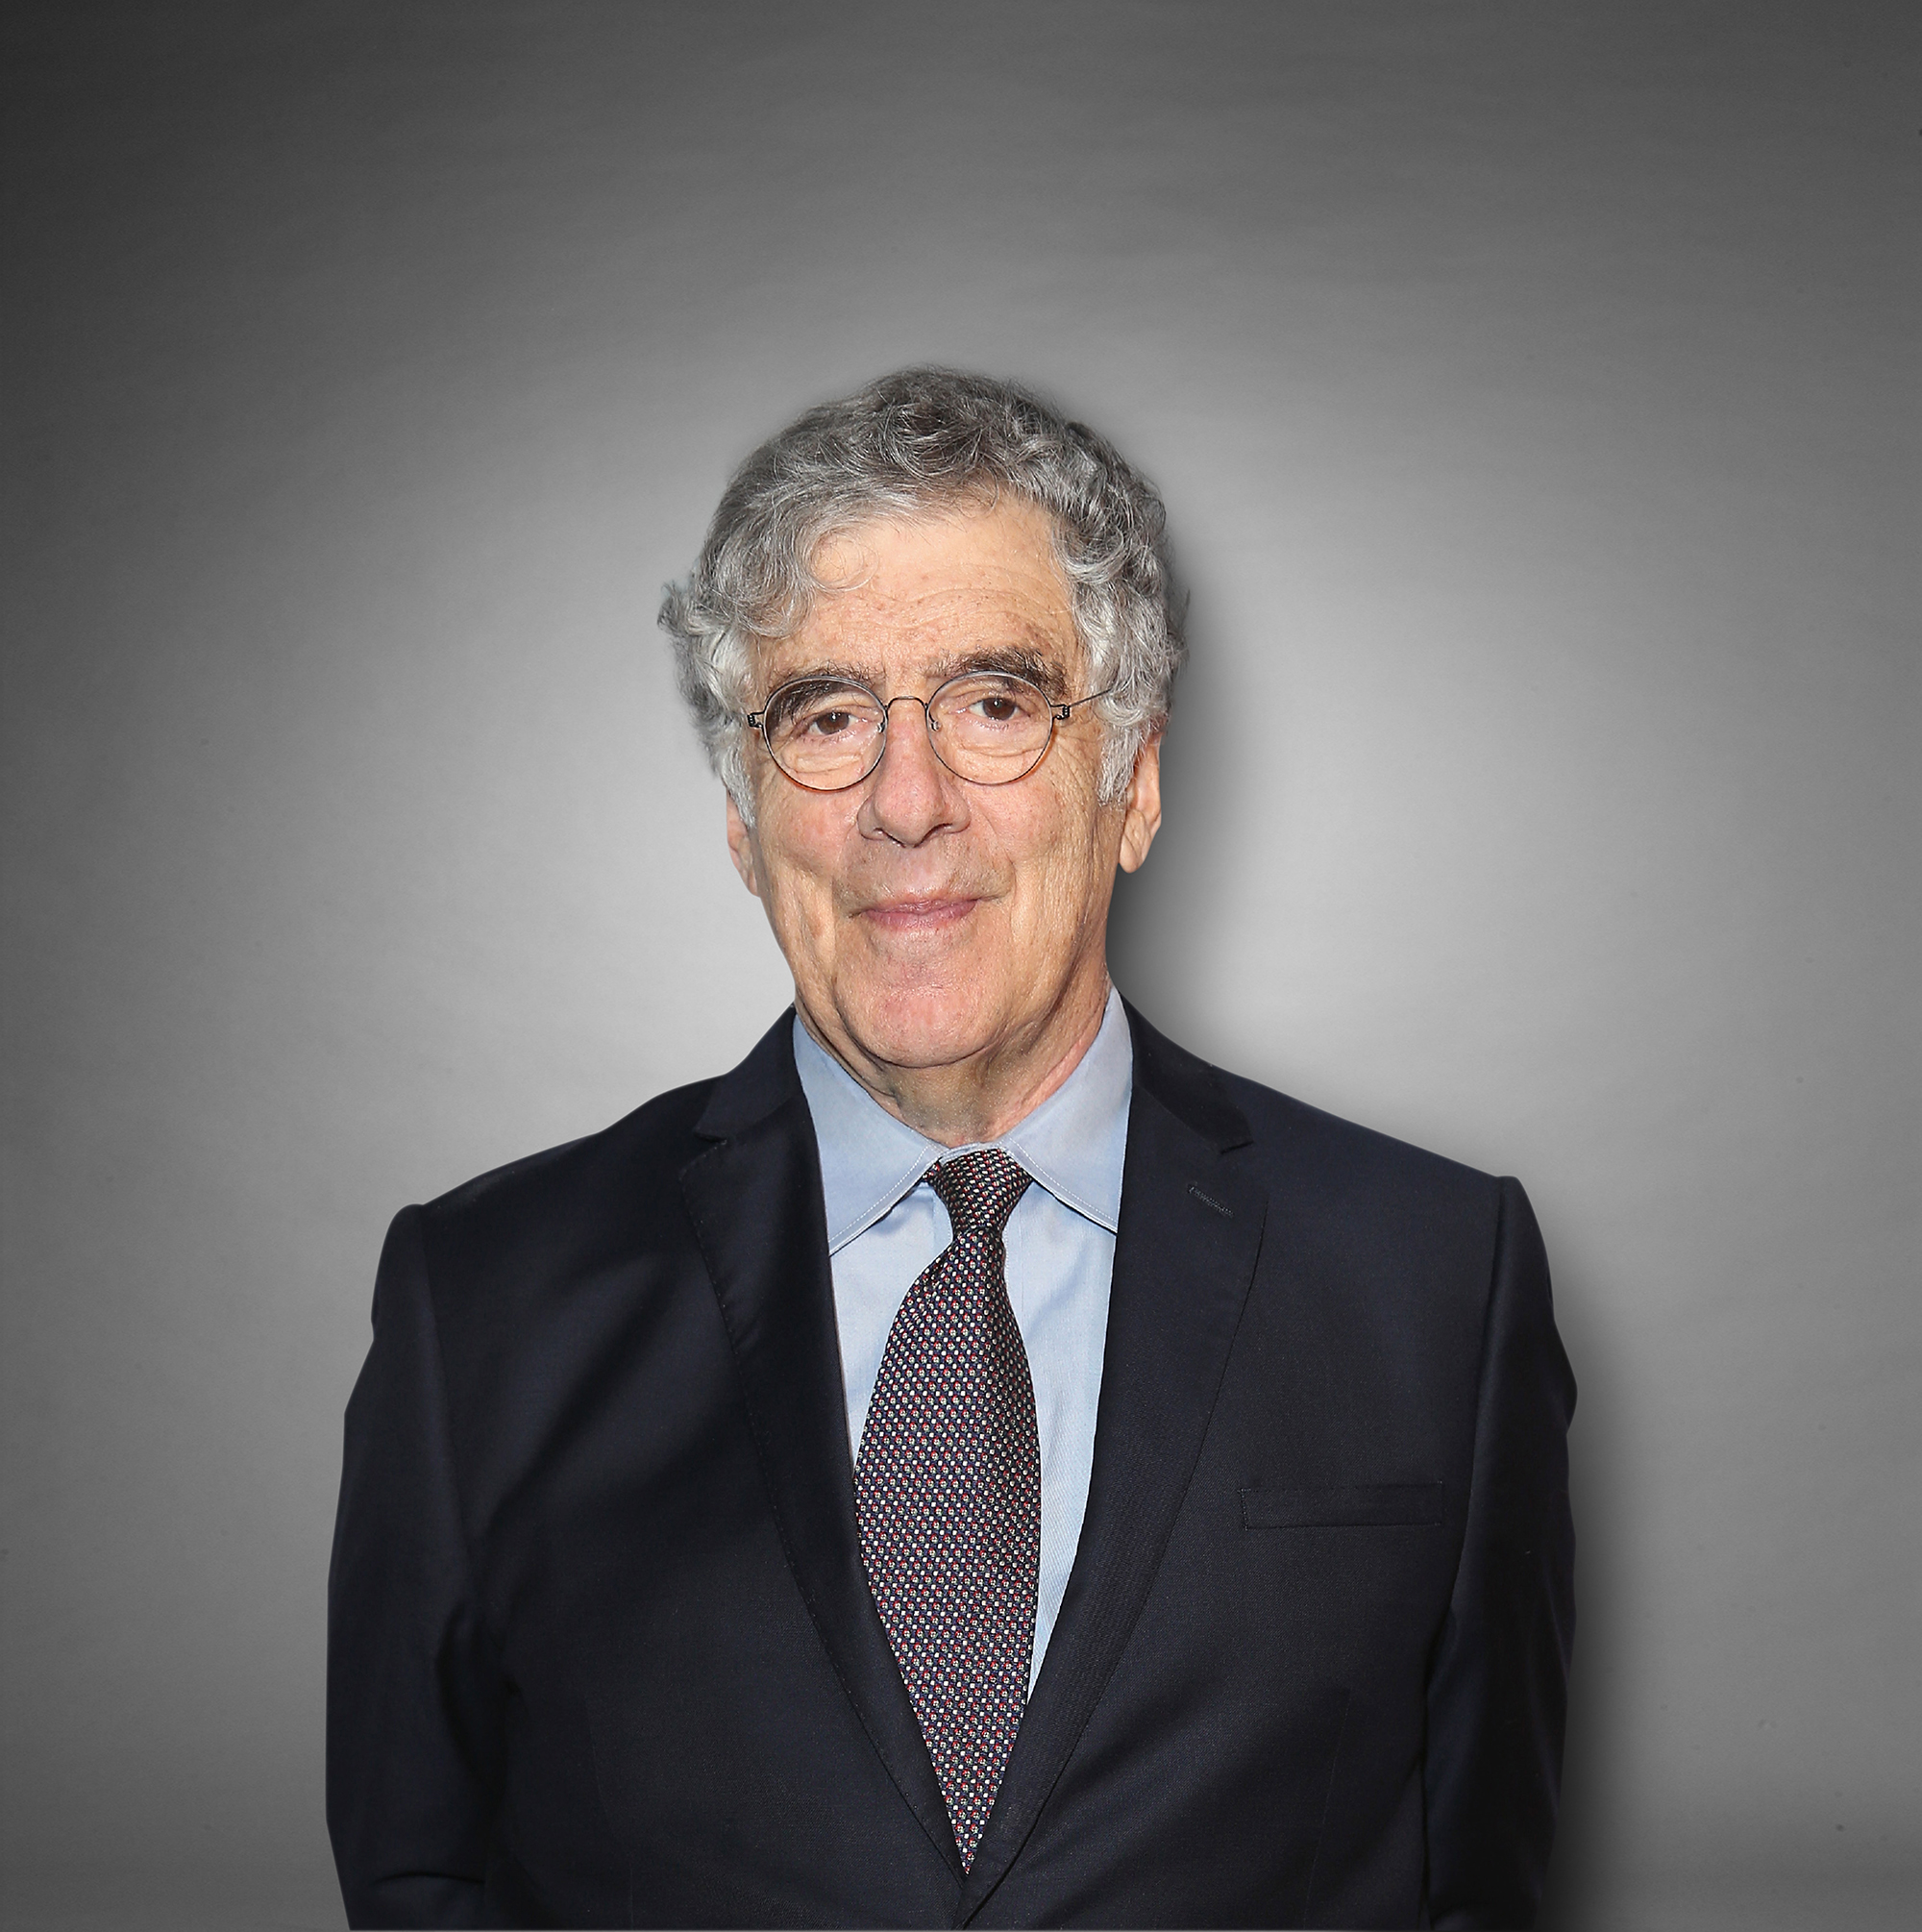 current (2023) headshot of actor Elliott Gould in promotion of his appearance at the 2023 TCM Classic Cruise